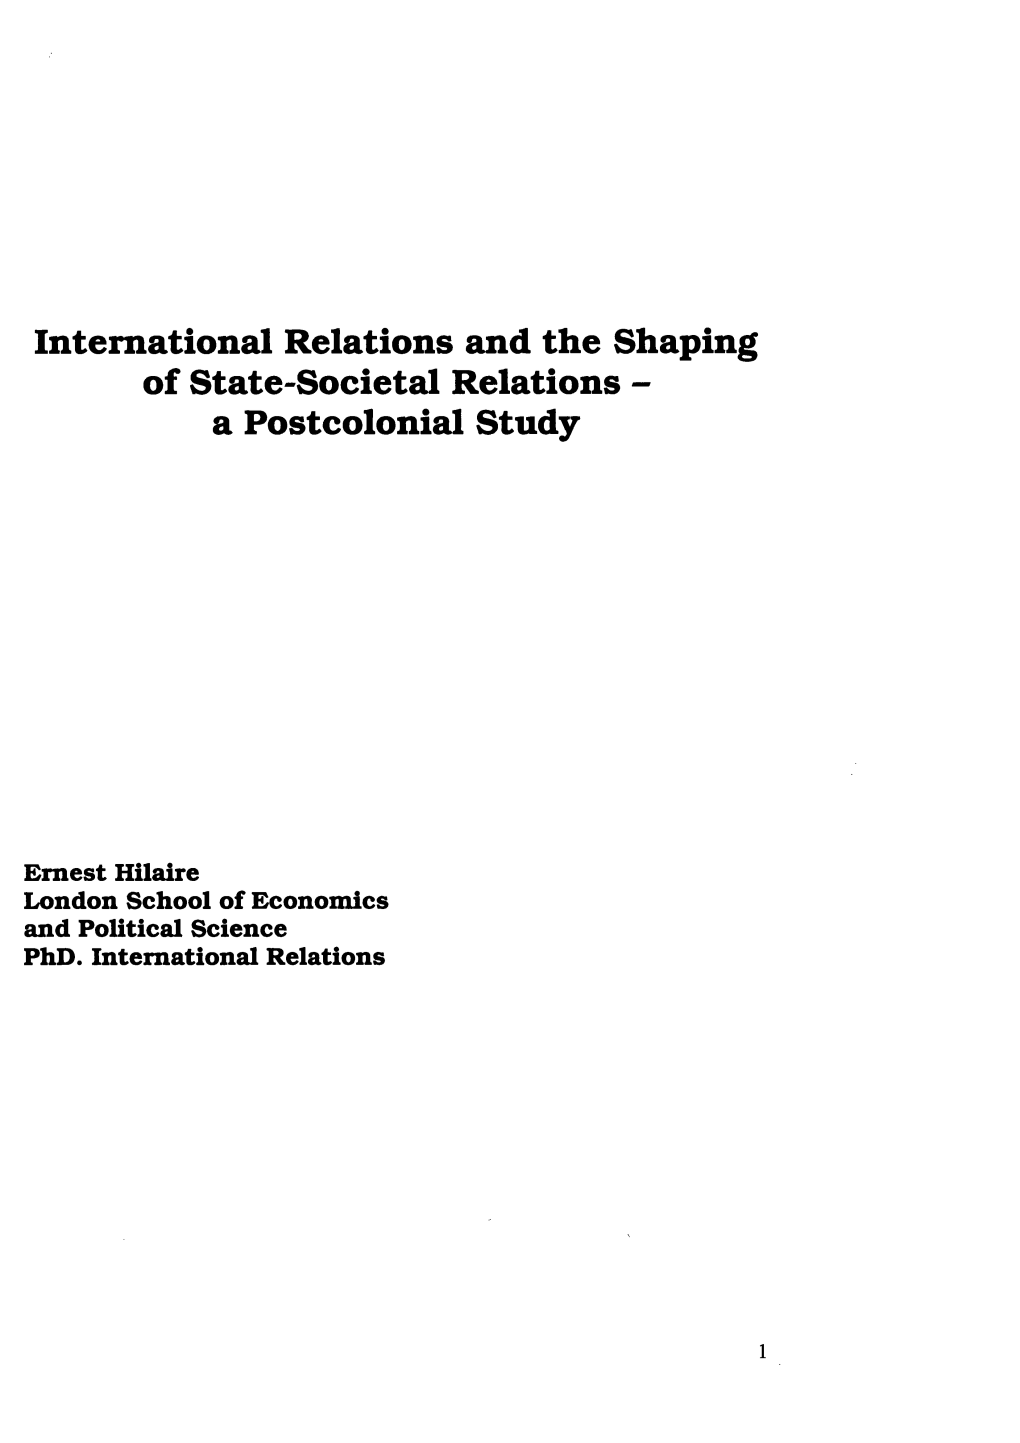 International Relations and the Shaping of State-Societal Relations - a Postcolonial Study